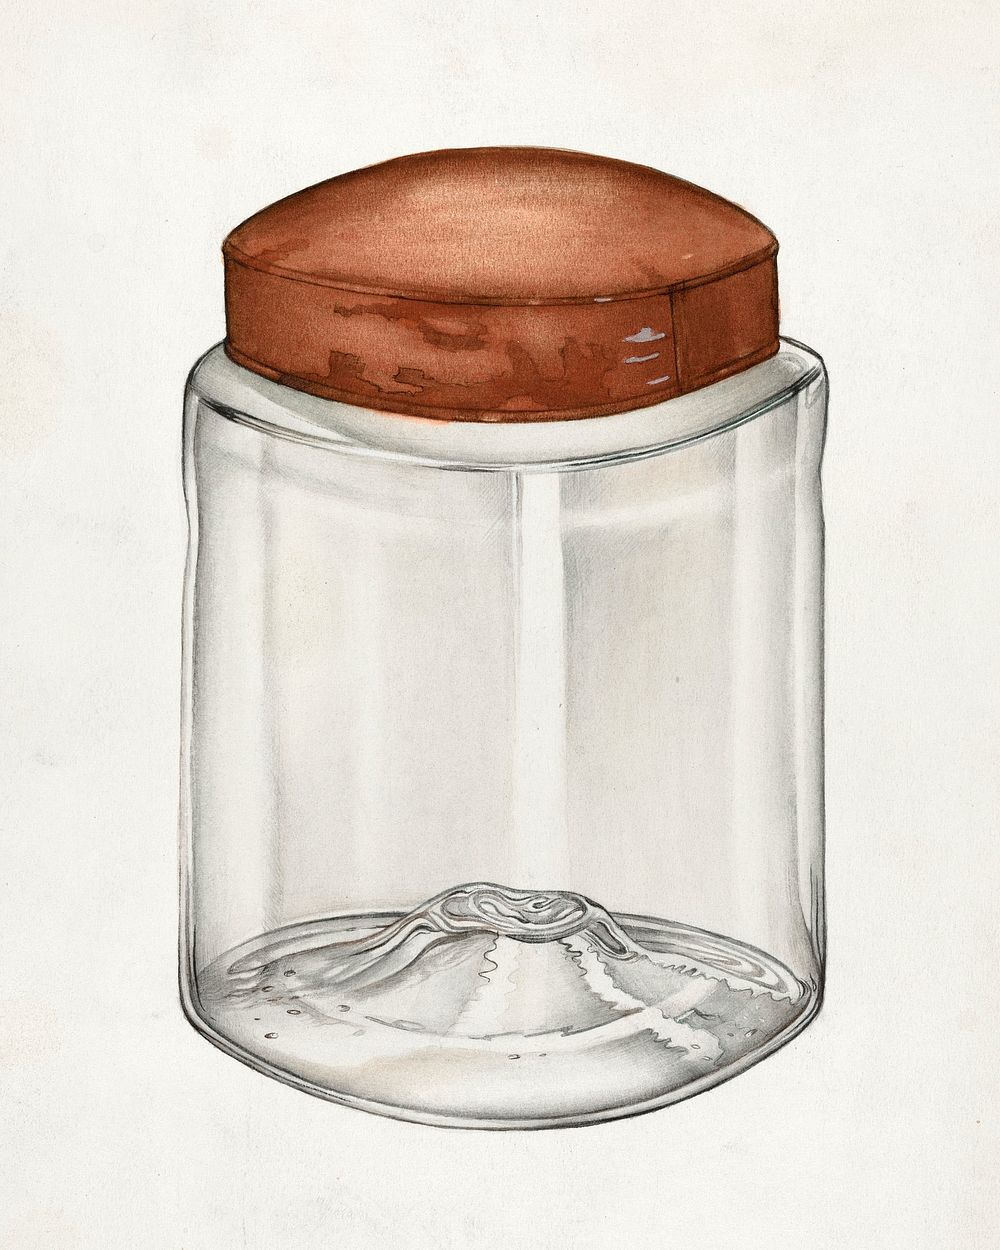 Shaker Sugar Jar (1941) by Charles Goodwin. Original from The National Gallery of Art. Digitally enhanced by rawpixel.